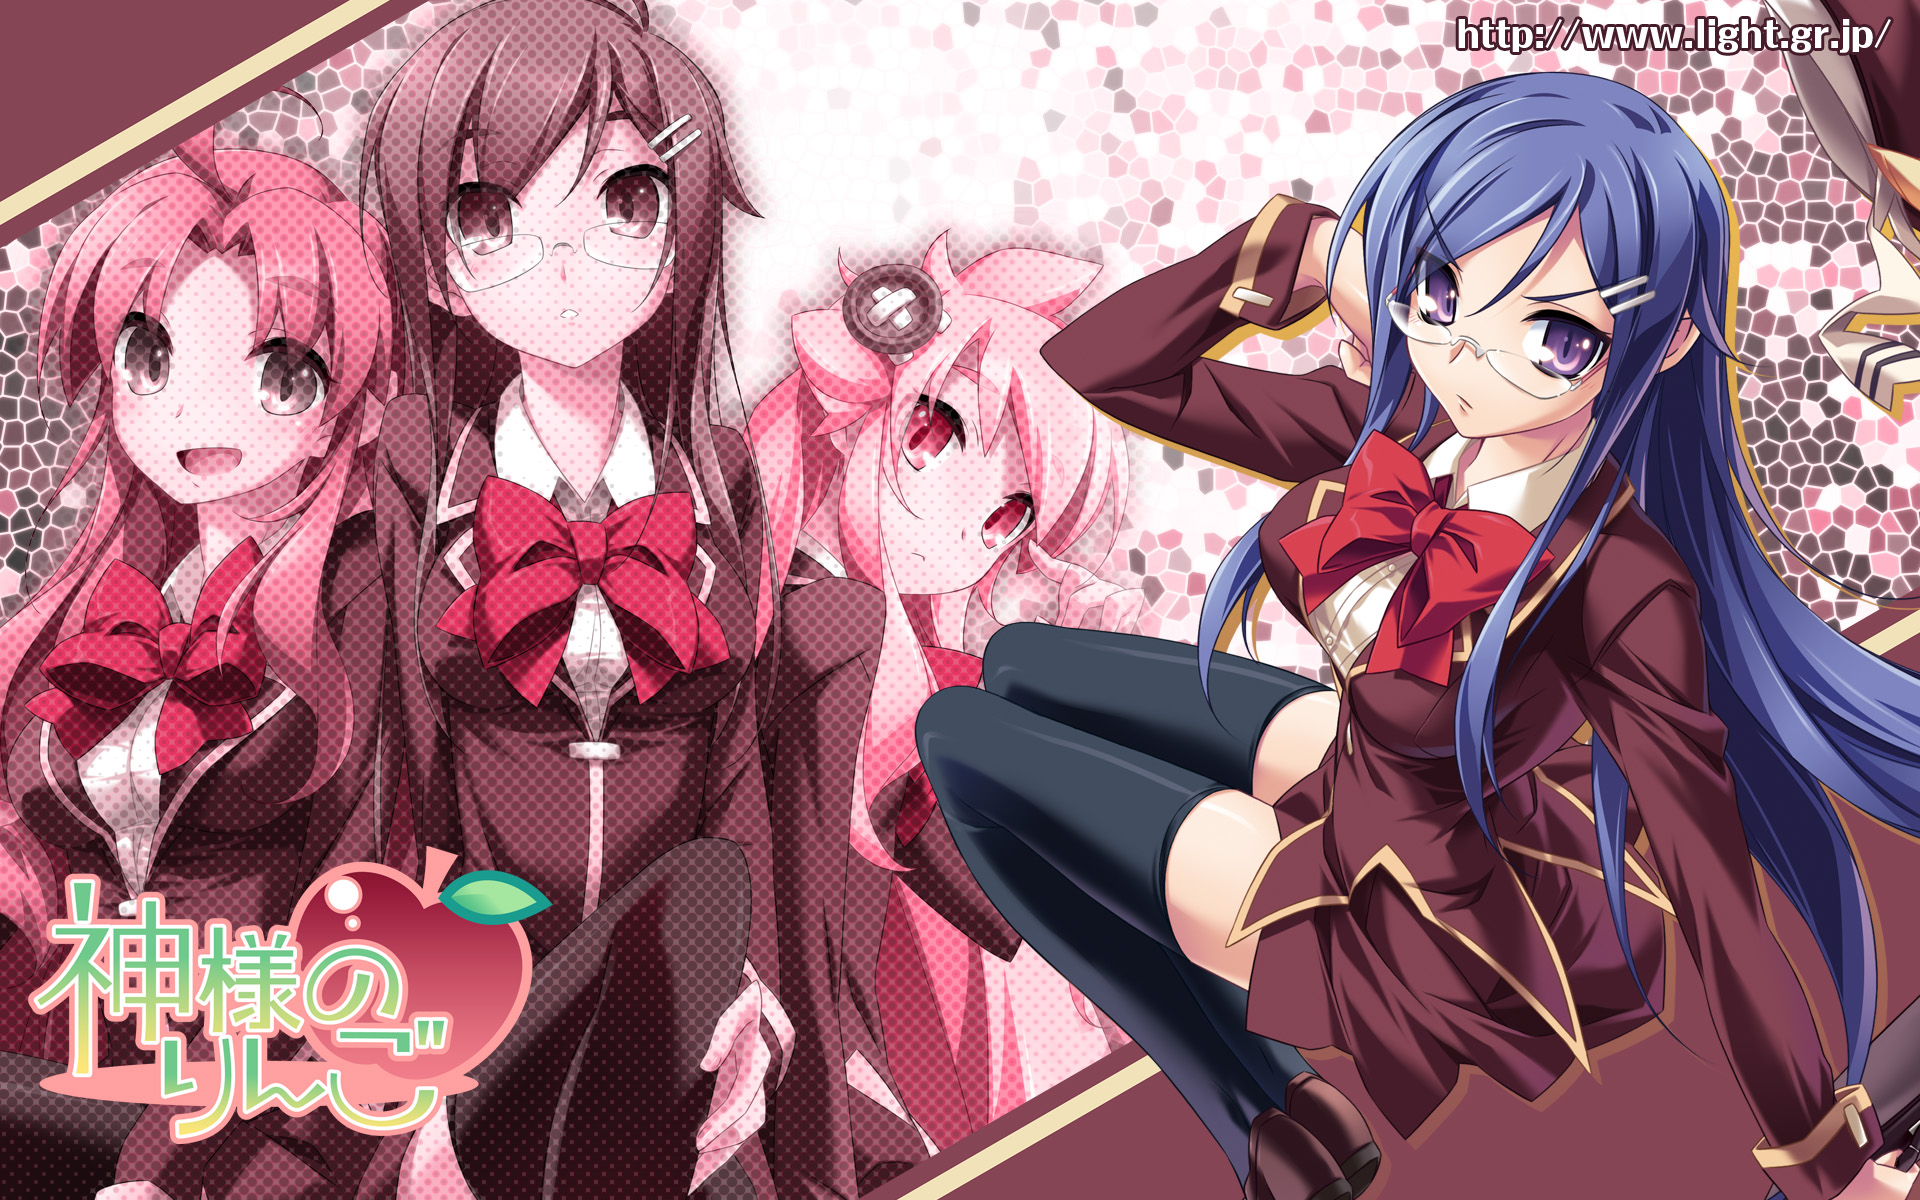 Anime Girls Wallpapers Pack 22/04/12